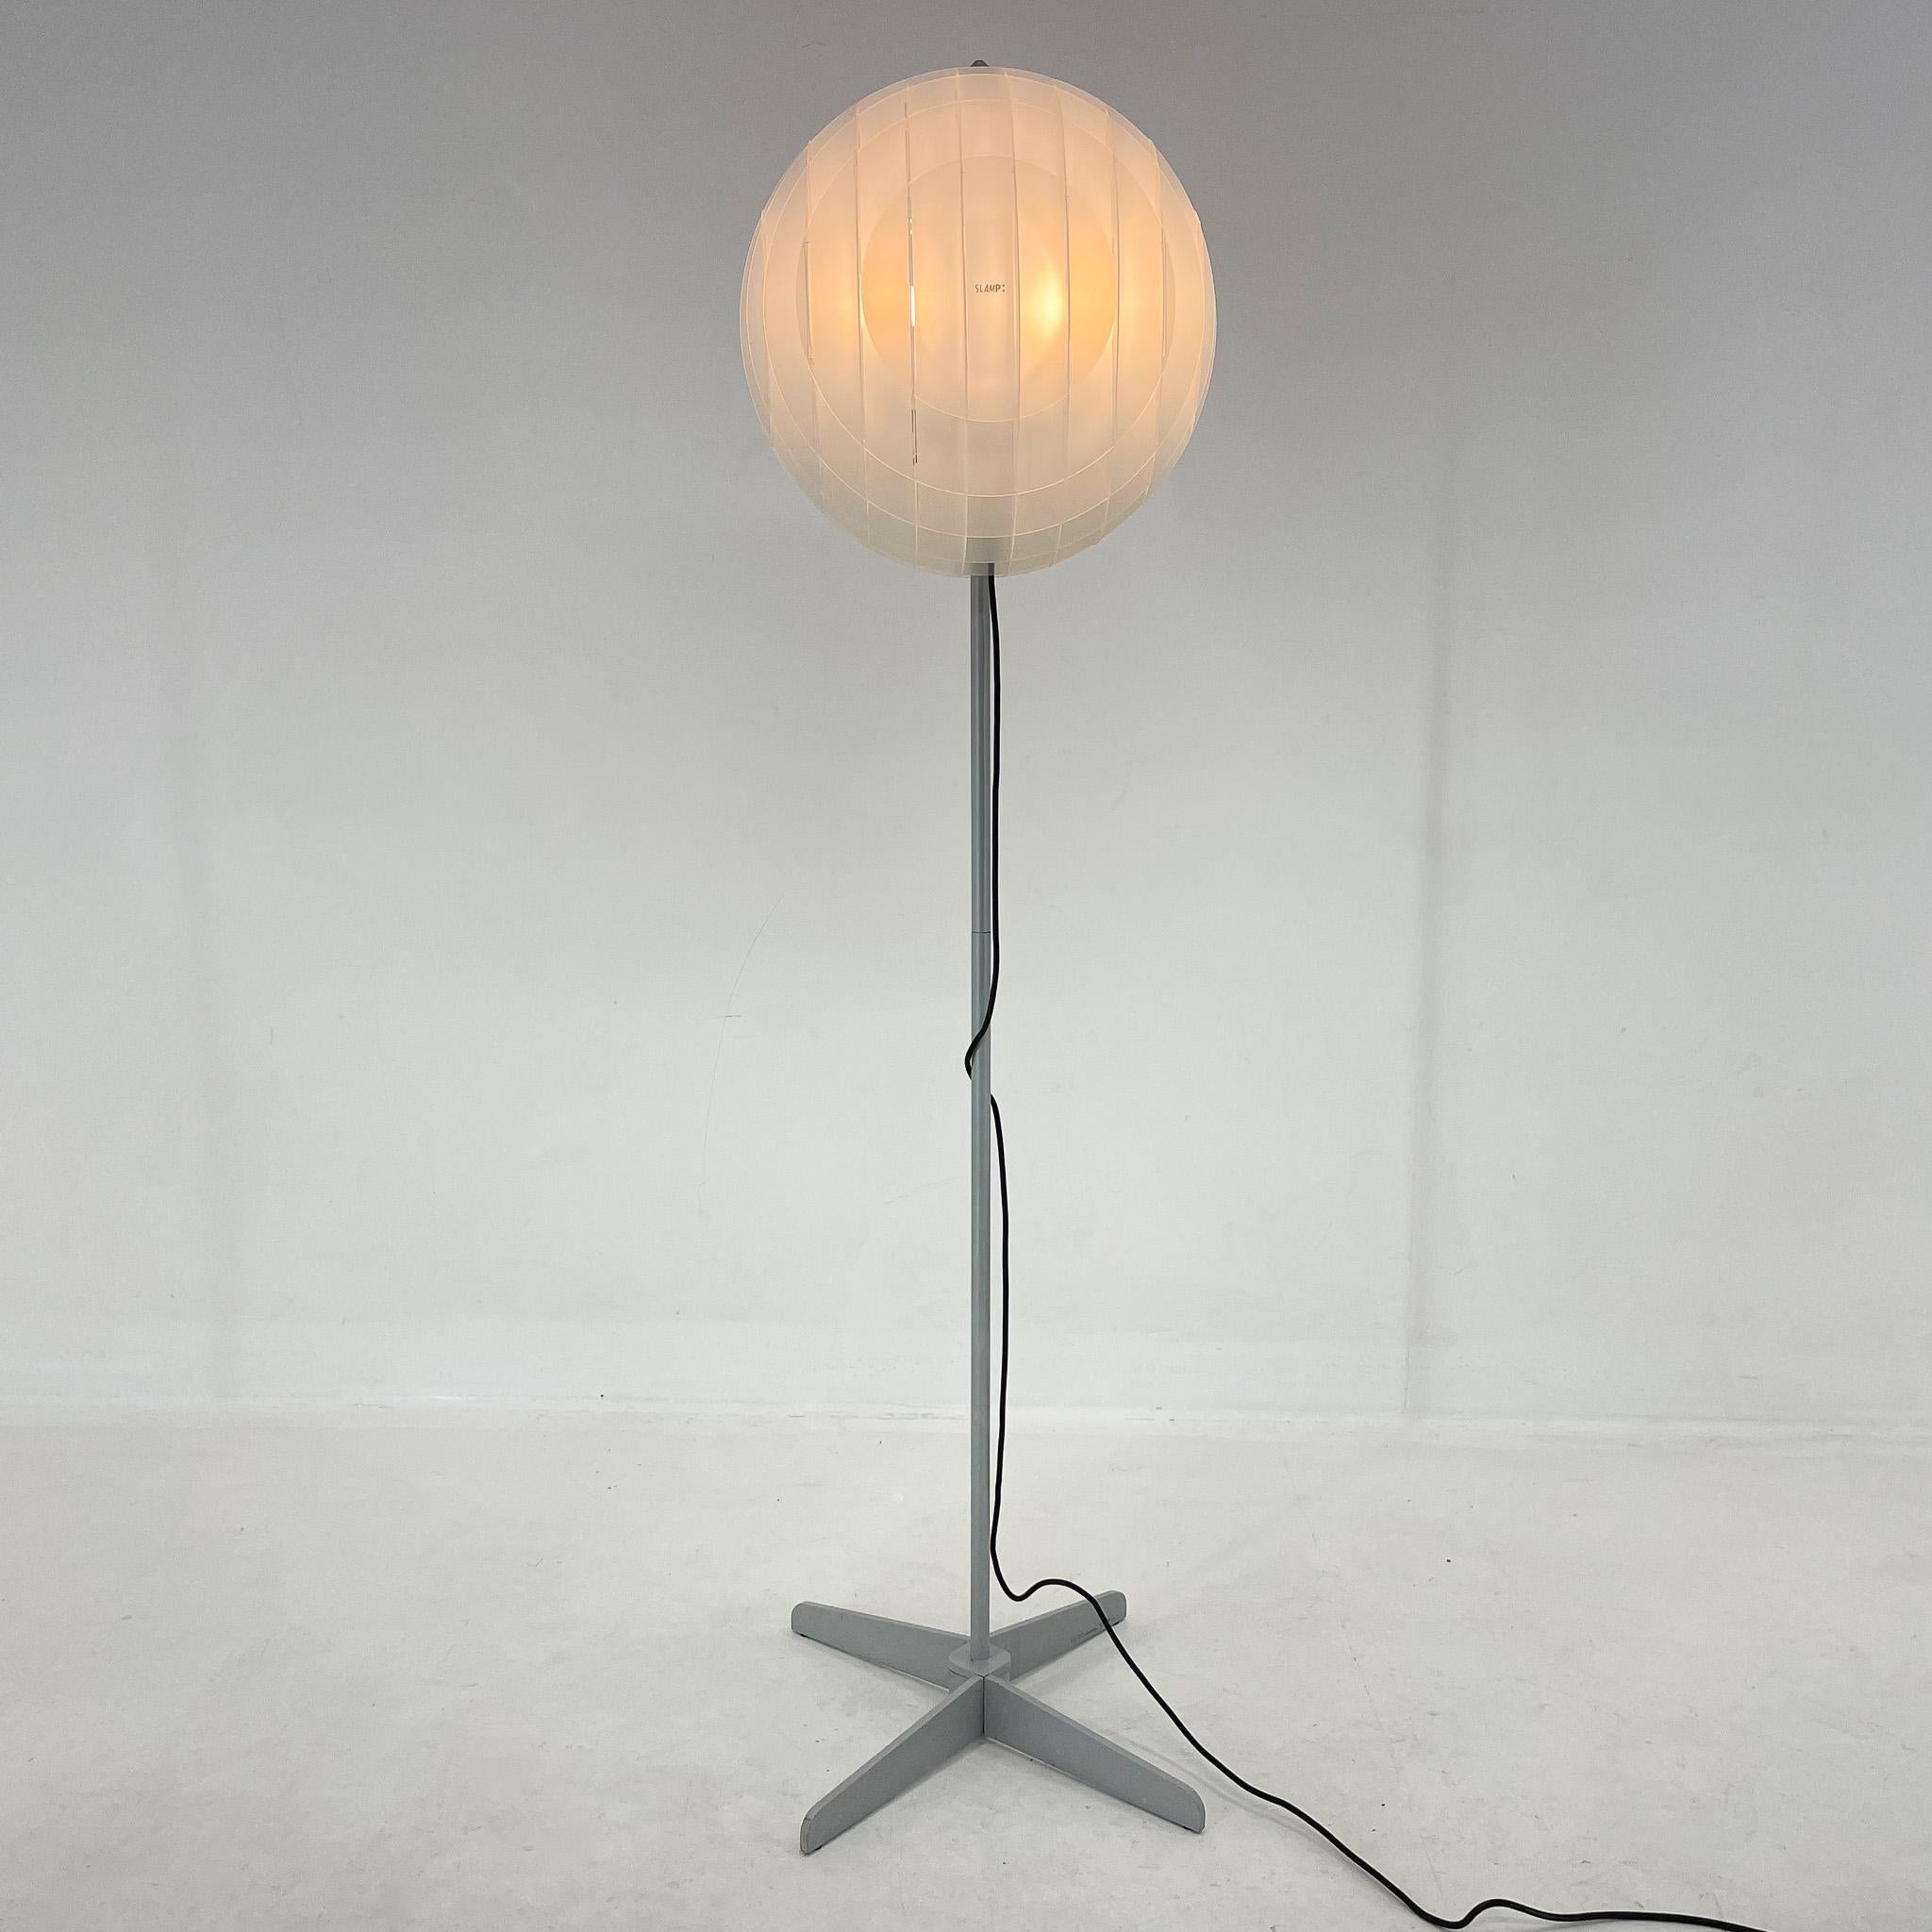 Vintage Italian floor lamp, designed by Samuel Parker for Slamp. Slamp is an Italian lighting manufacturer founded in 1994. 
The company overturned established ideas of Italian design and actively employed young designers to produce fashionable and